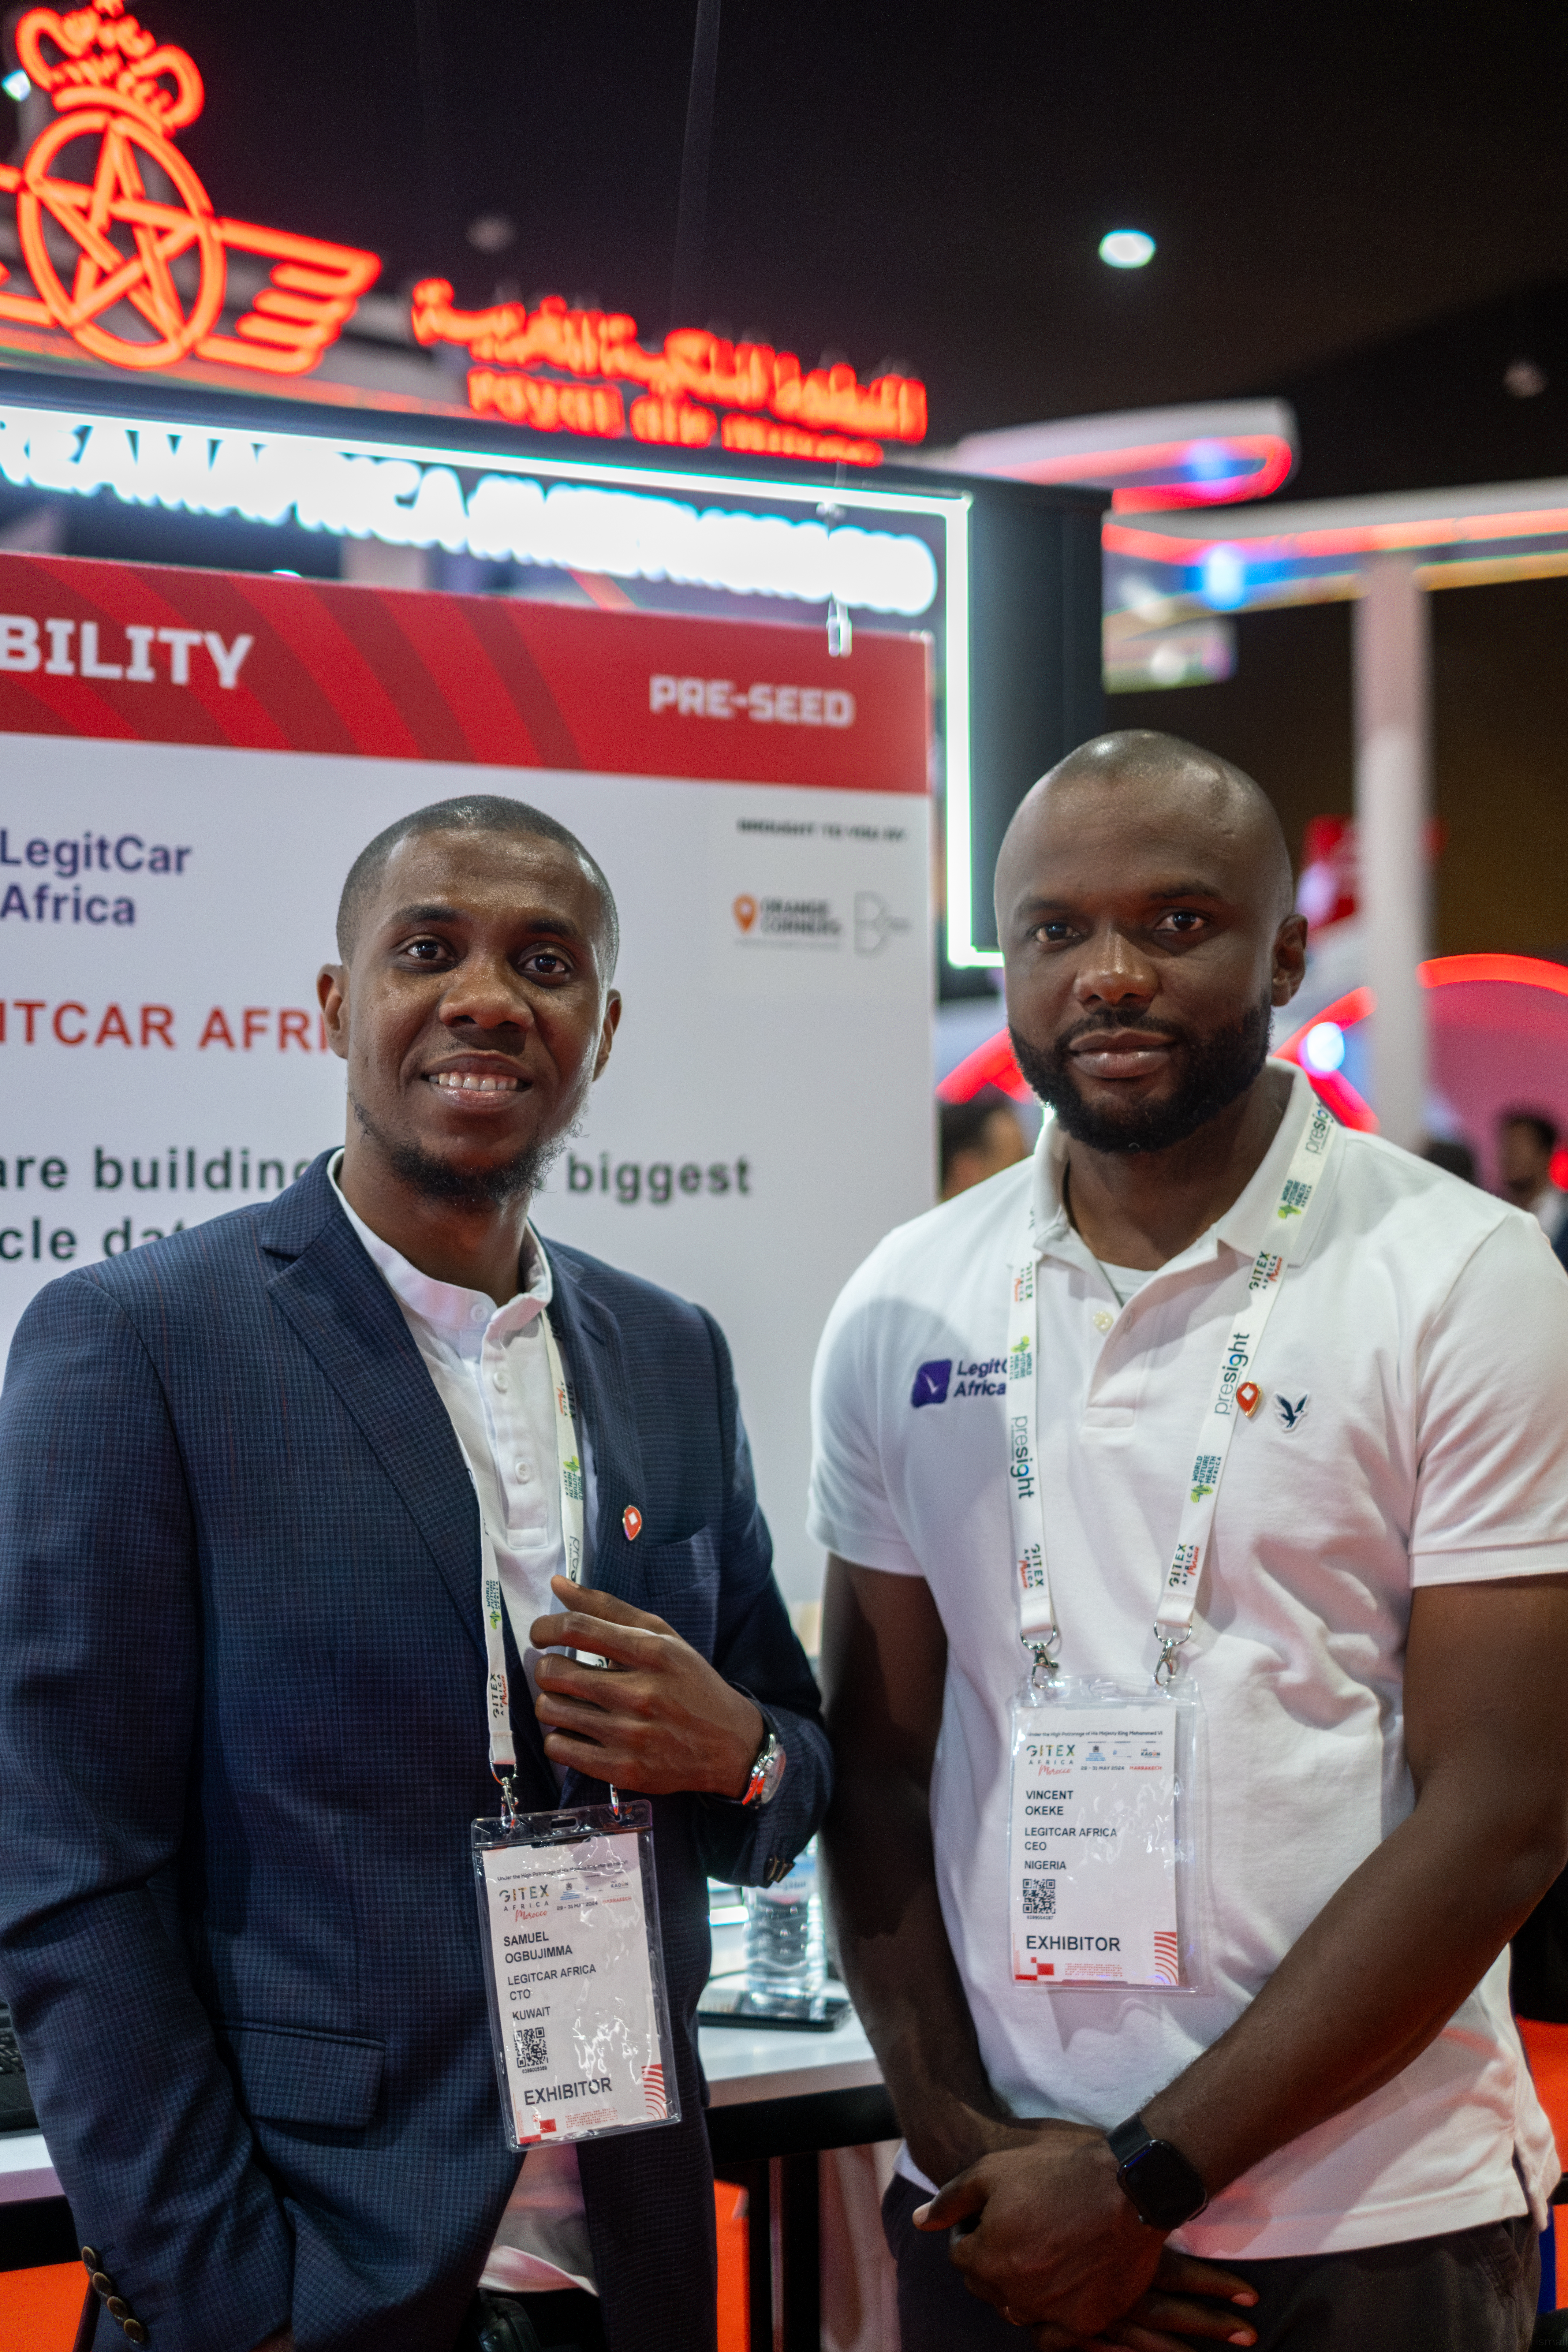 Image of Legit car cofounders at the GITEX conference. Left image: Samuel Ogbujimma (CTO). Right image: Vincent Okeke (CEO)